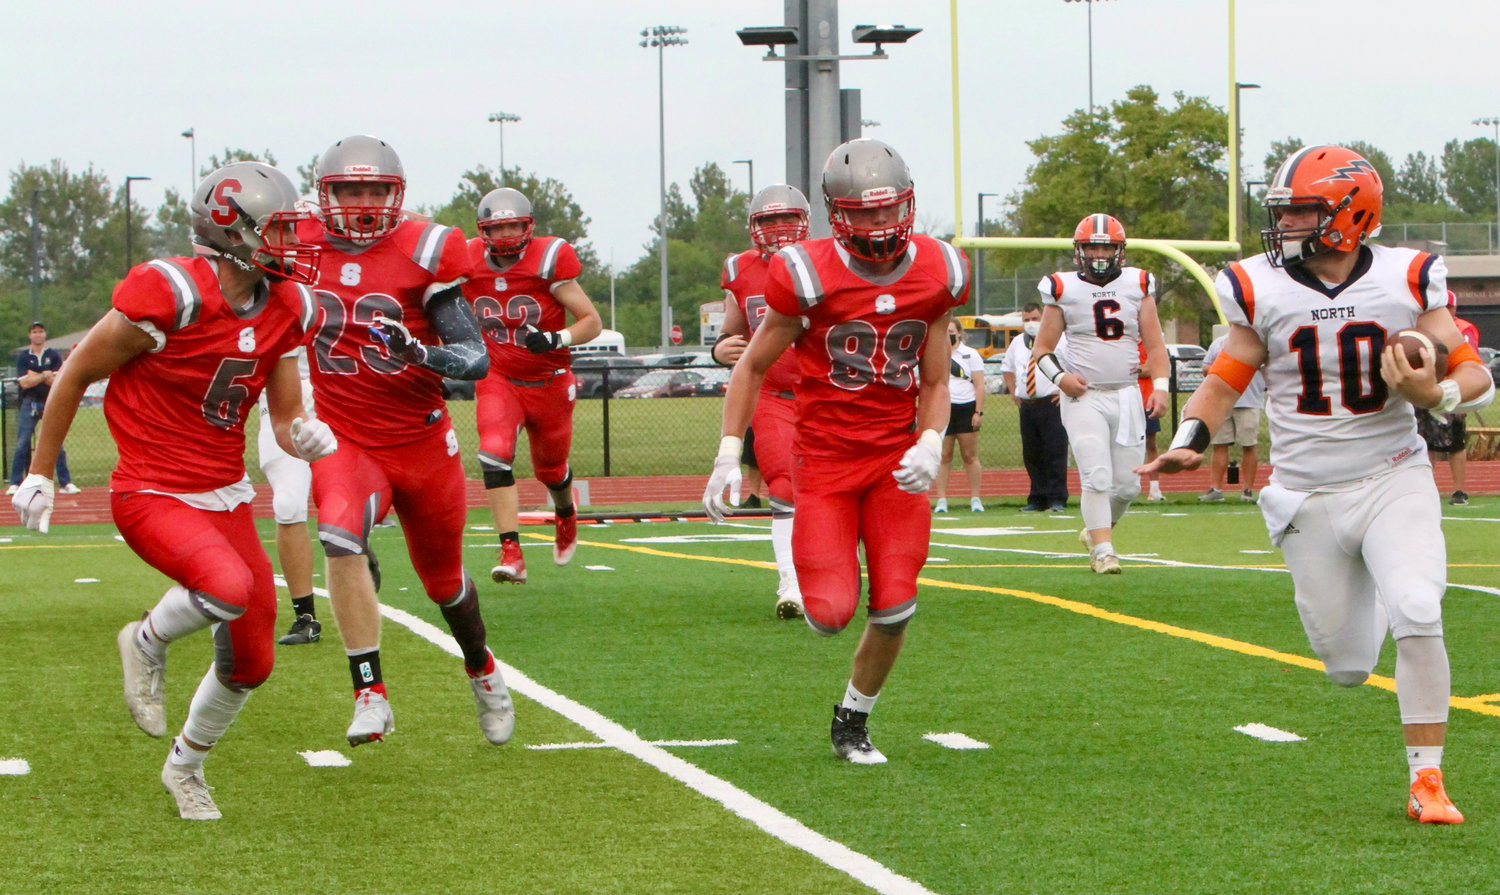 Austin Sulc attempts to out-run the Southmont defense.